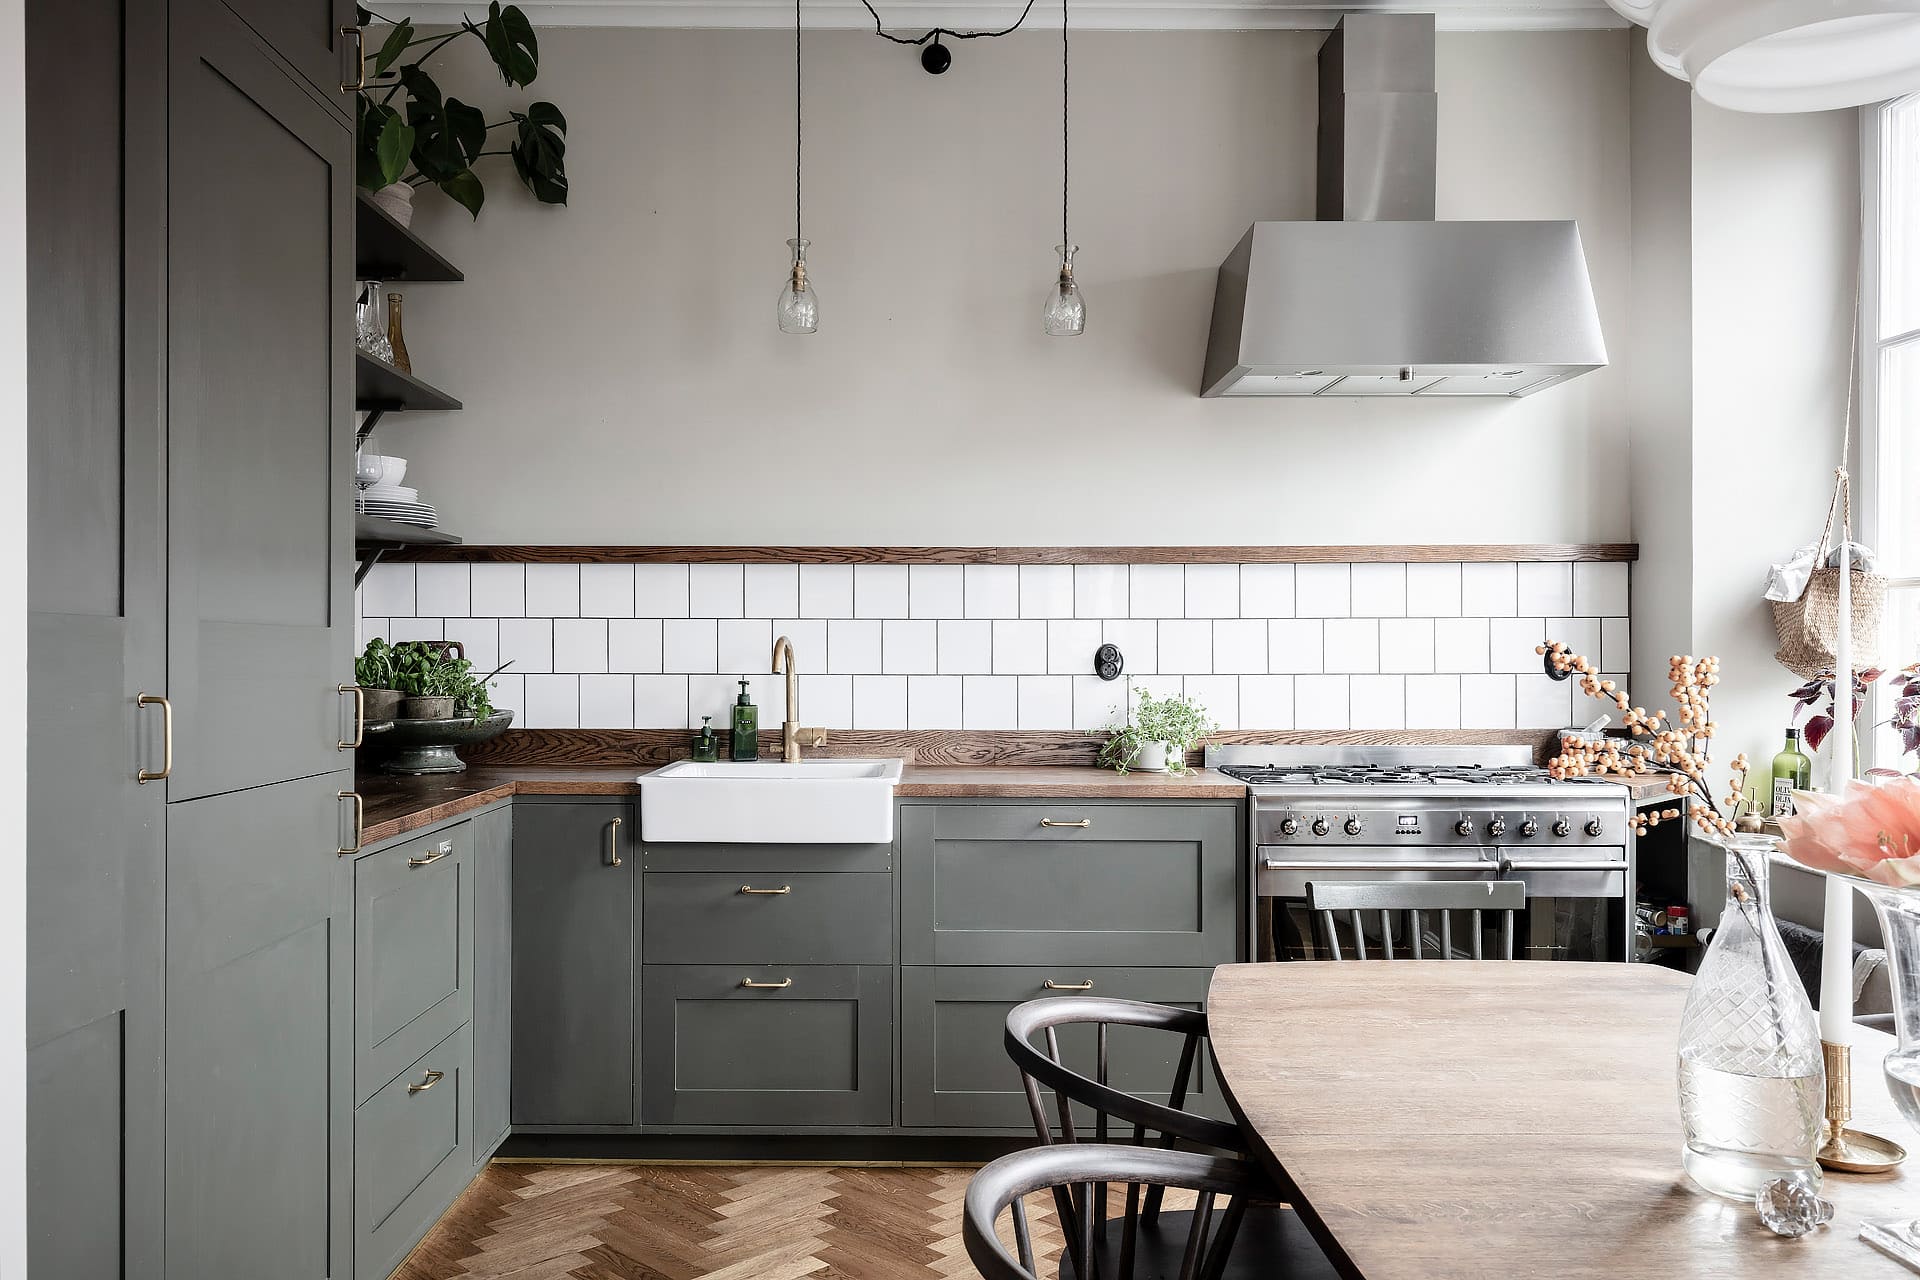 18 Fresh Mint Green Kitchen Ideas and Accessories